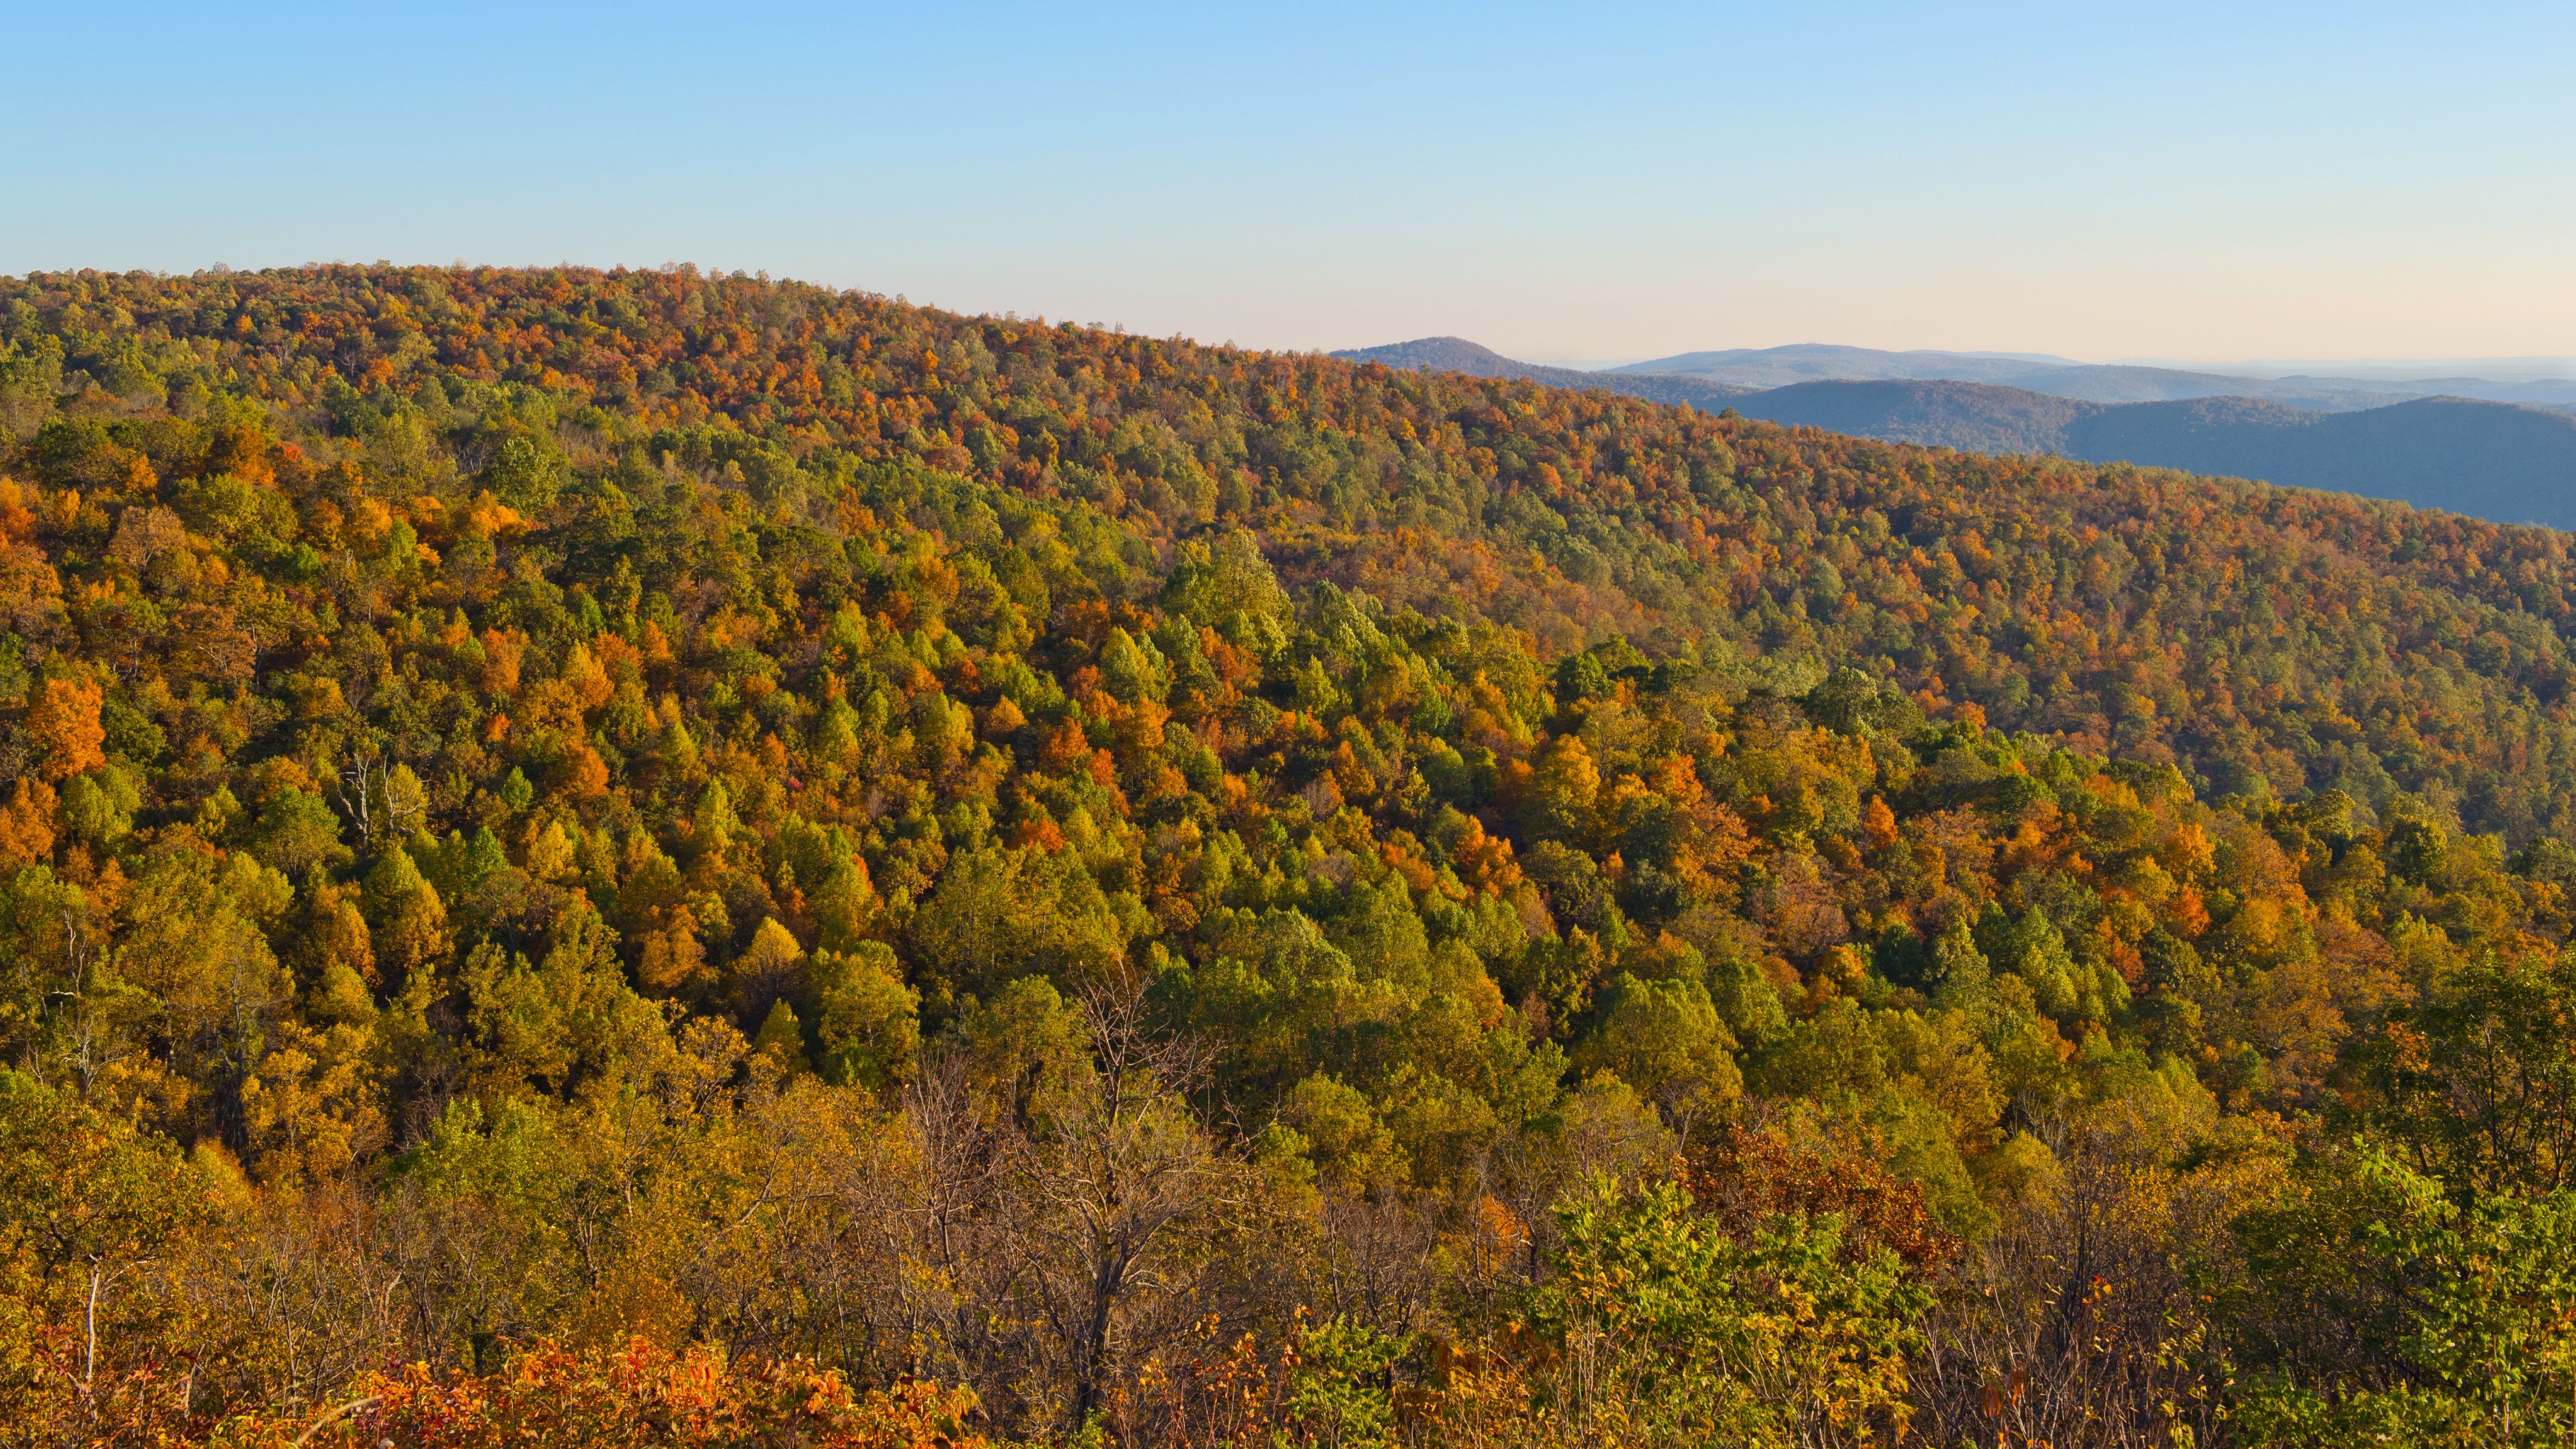 Reforestation could be a powerful tool against climate change, according to a new study. Pictured, Shenandoah National Park in Virginia, October 2013.